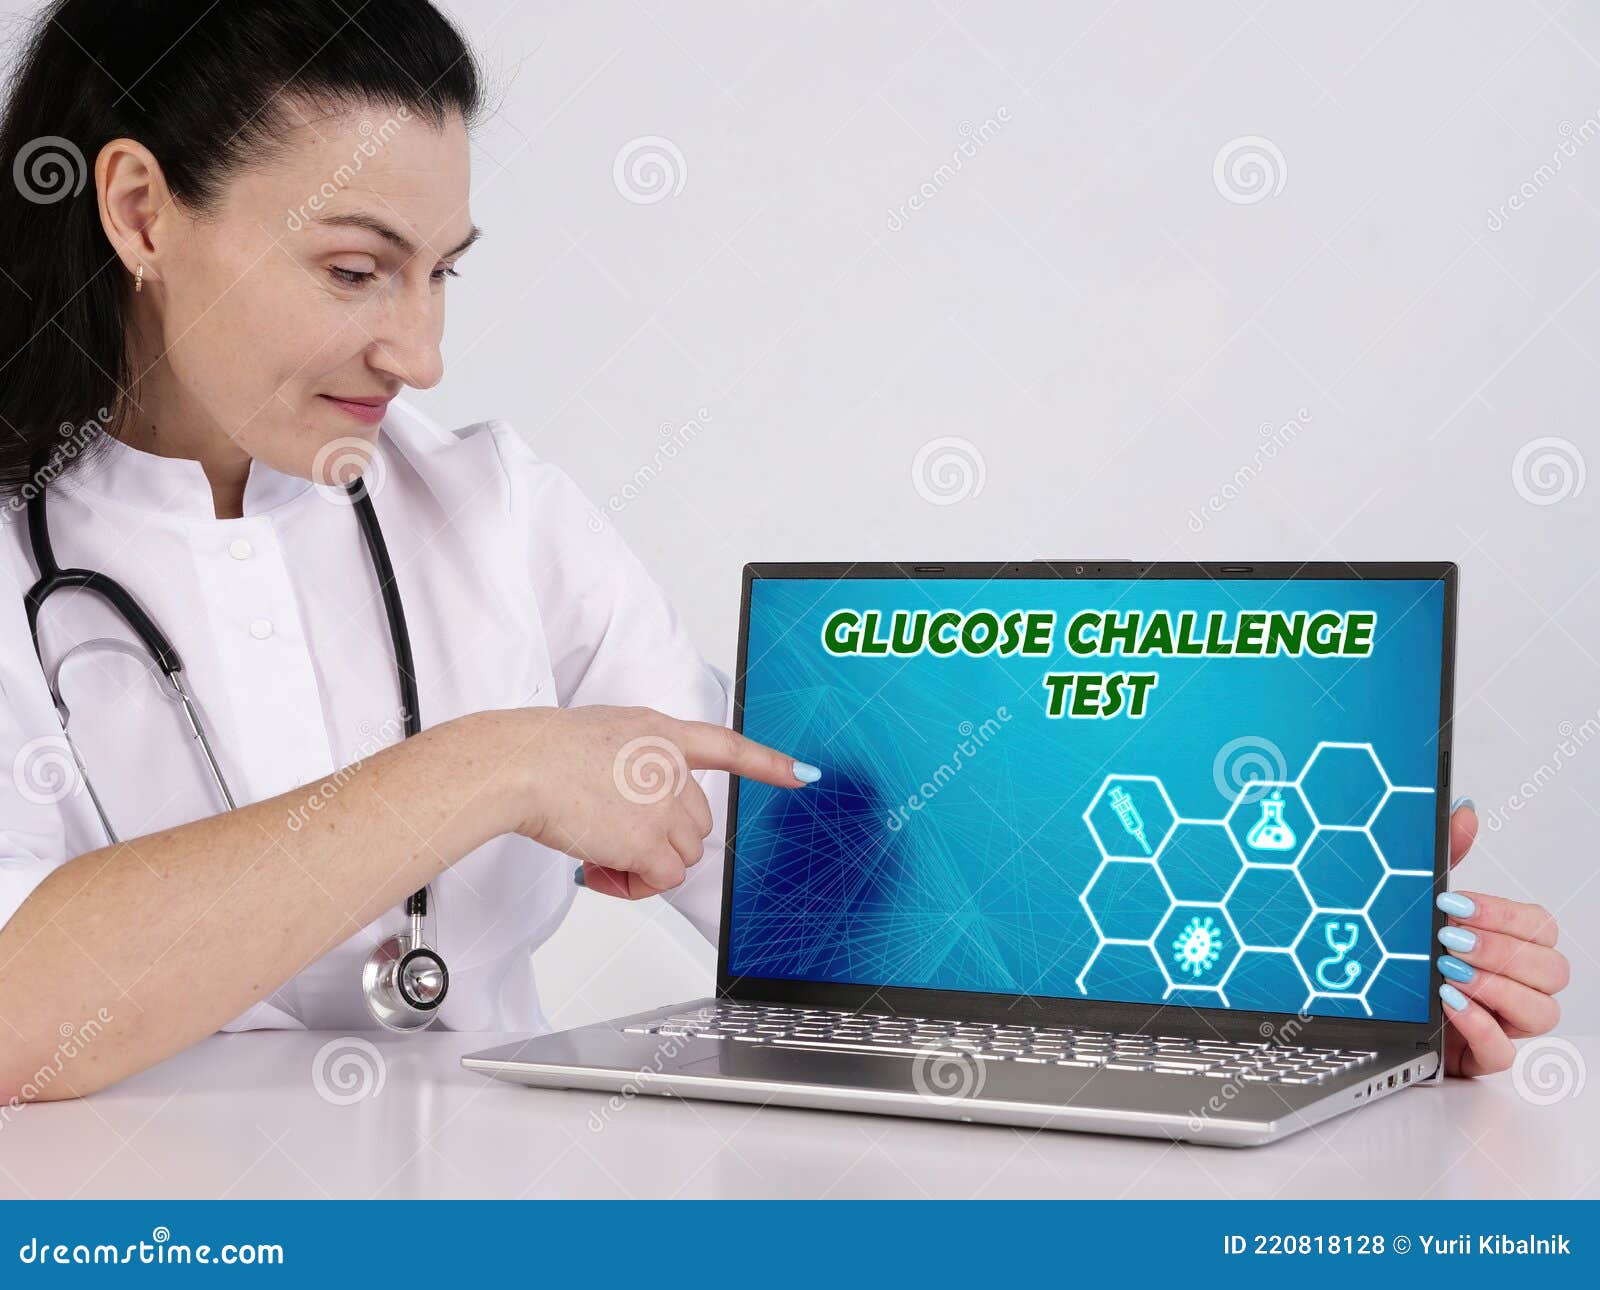 glucose challenge test text in search bar. medico looking for something at laptop